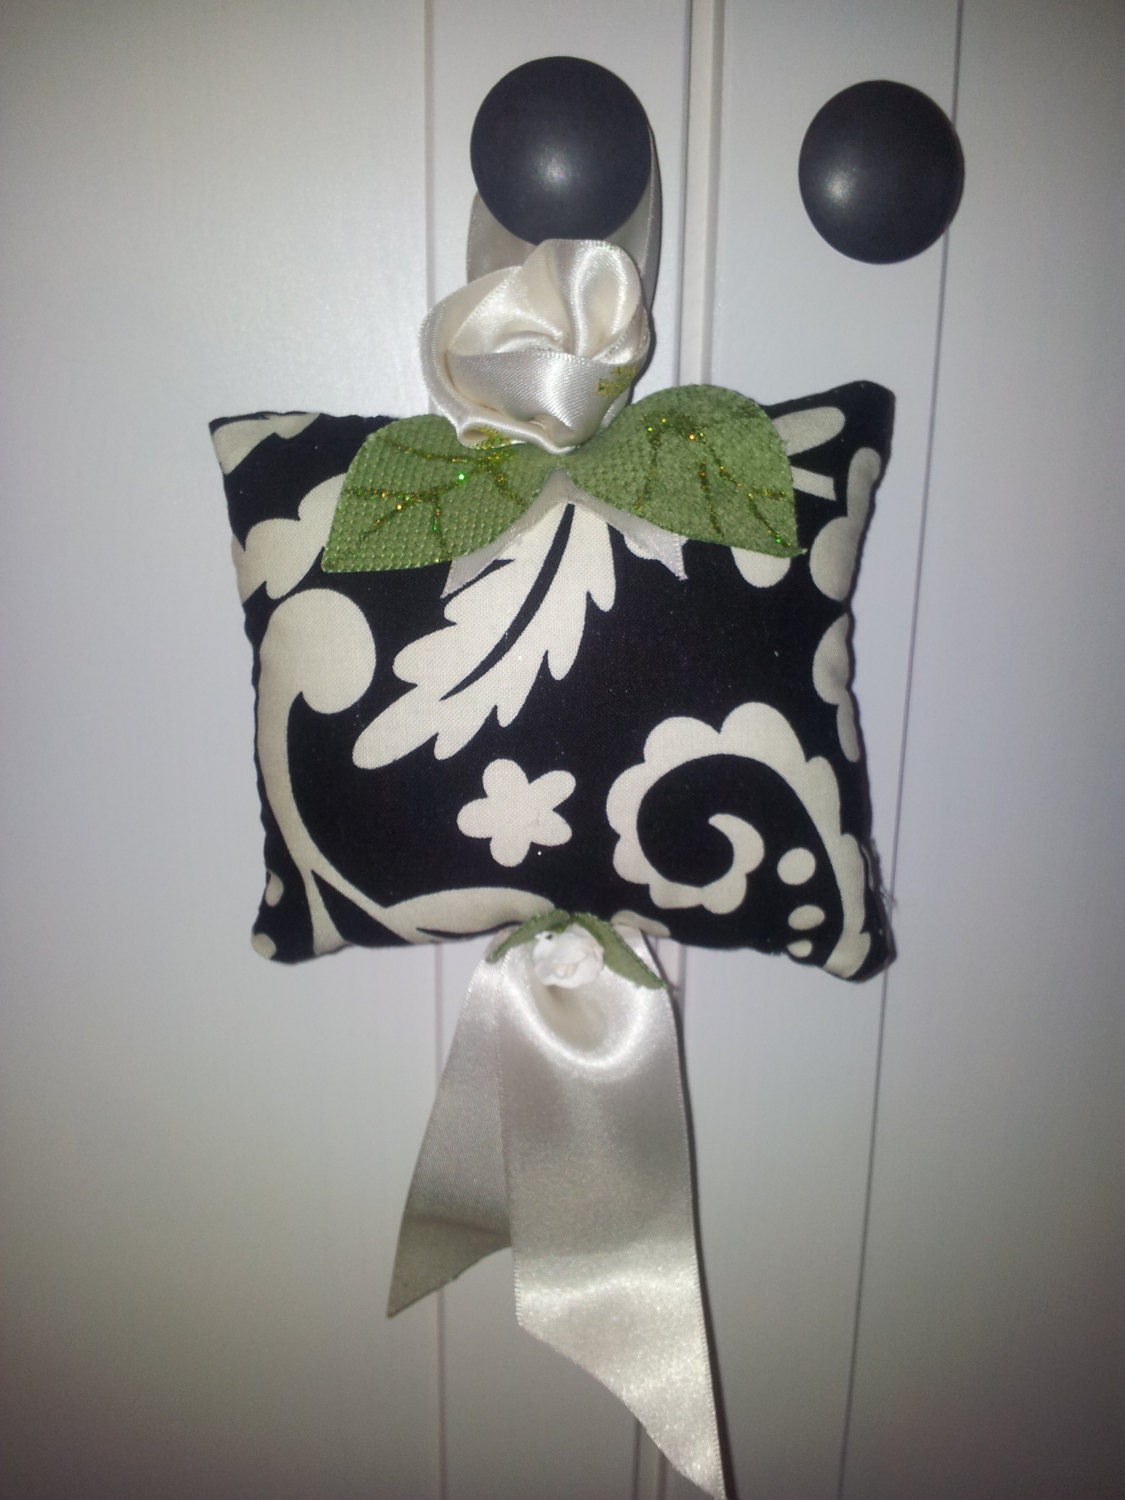 Art Deco 1920's Fabric Vintage Style Decorative Hanger By Handmade Little Creations